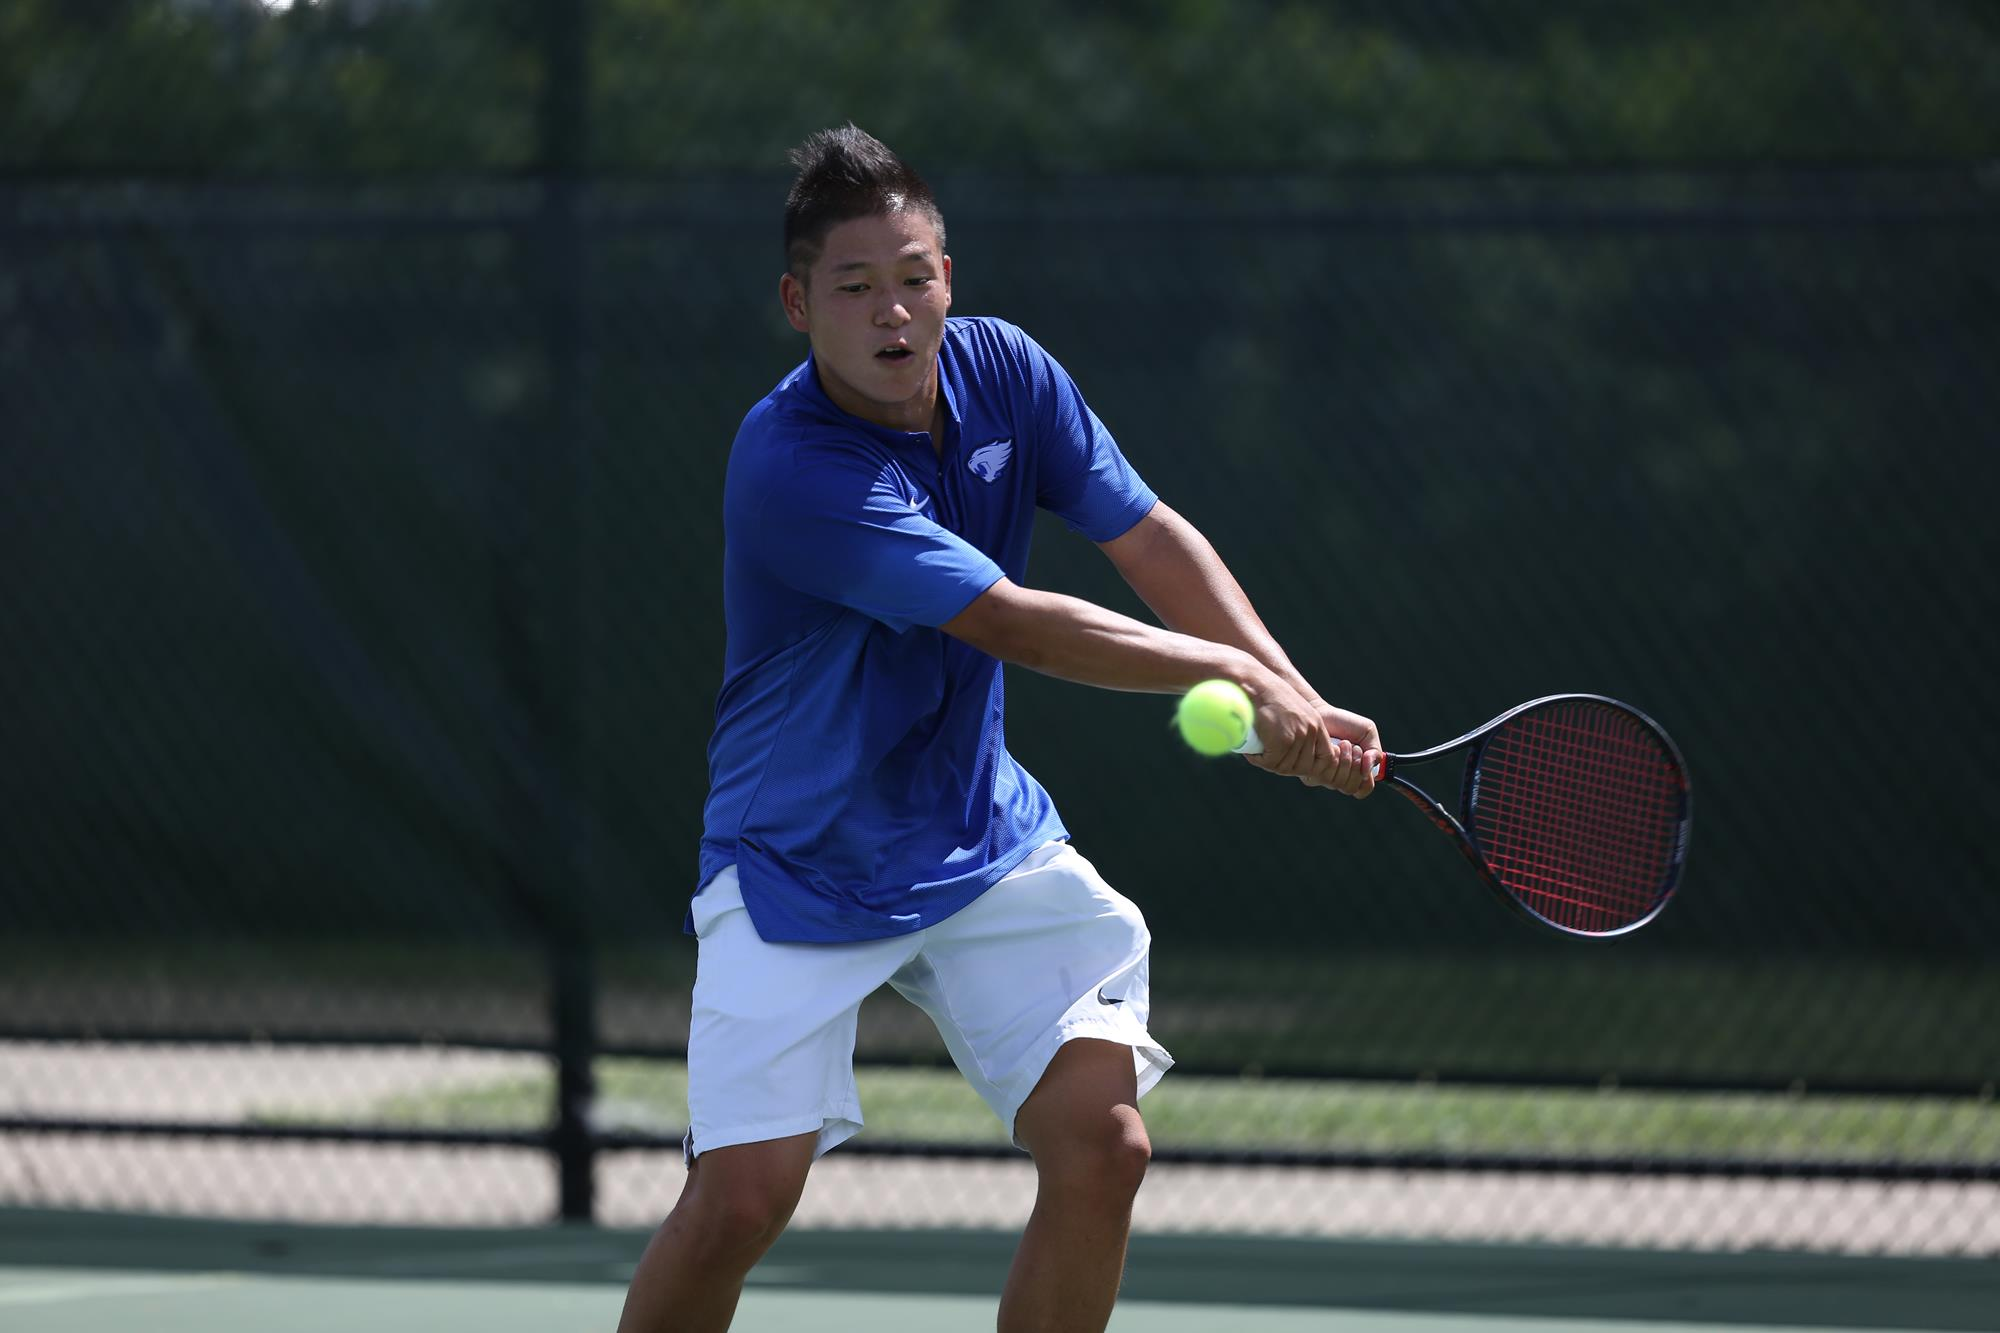 Yamada, Huempfner Win Respective Singles Draws in Cats Final Fall Event